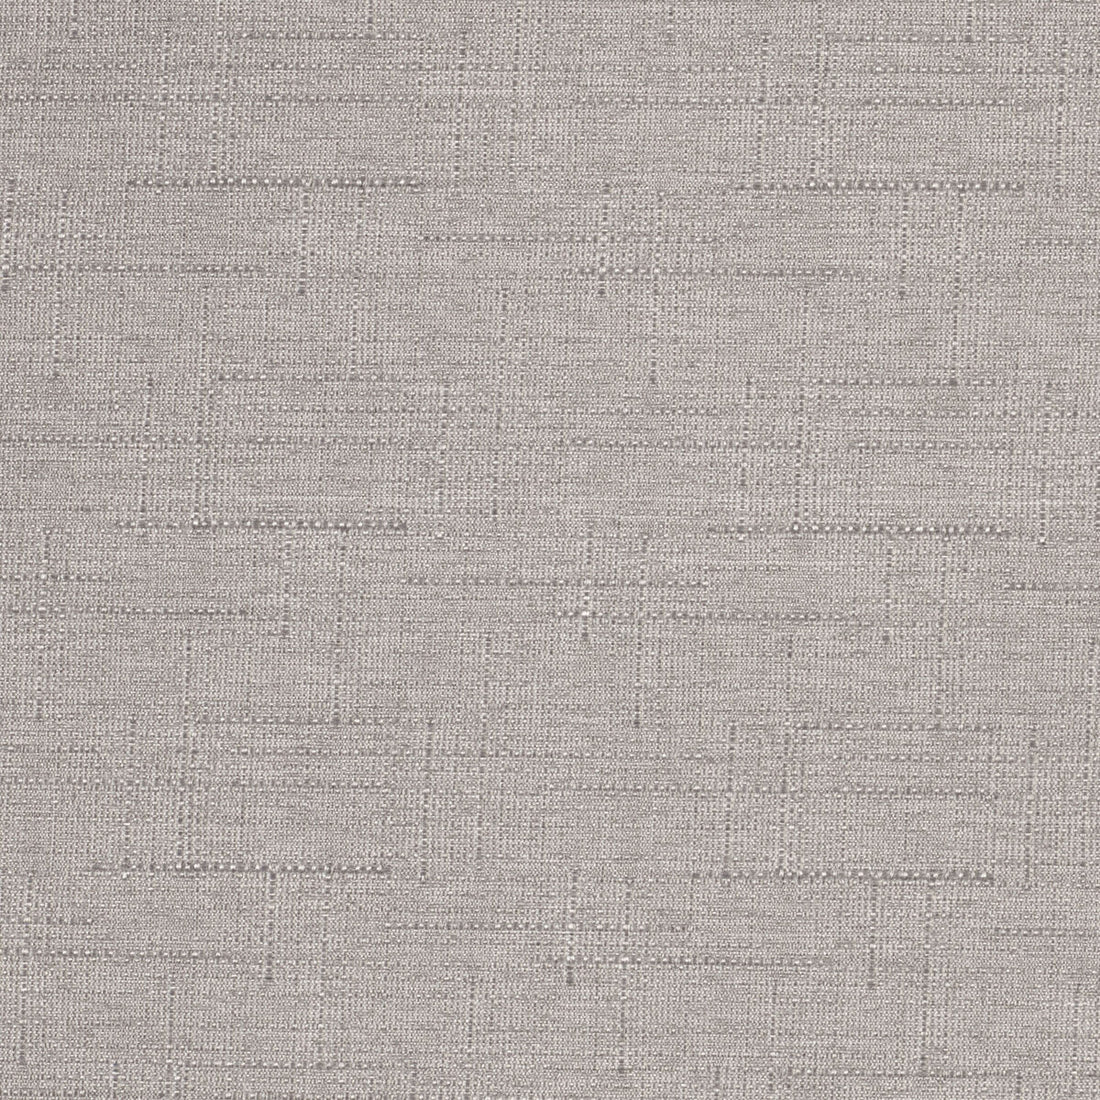 Kravet Contract fabric in 4321-110 color - pattern 4321.110.0 - by Kravet Contract